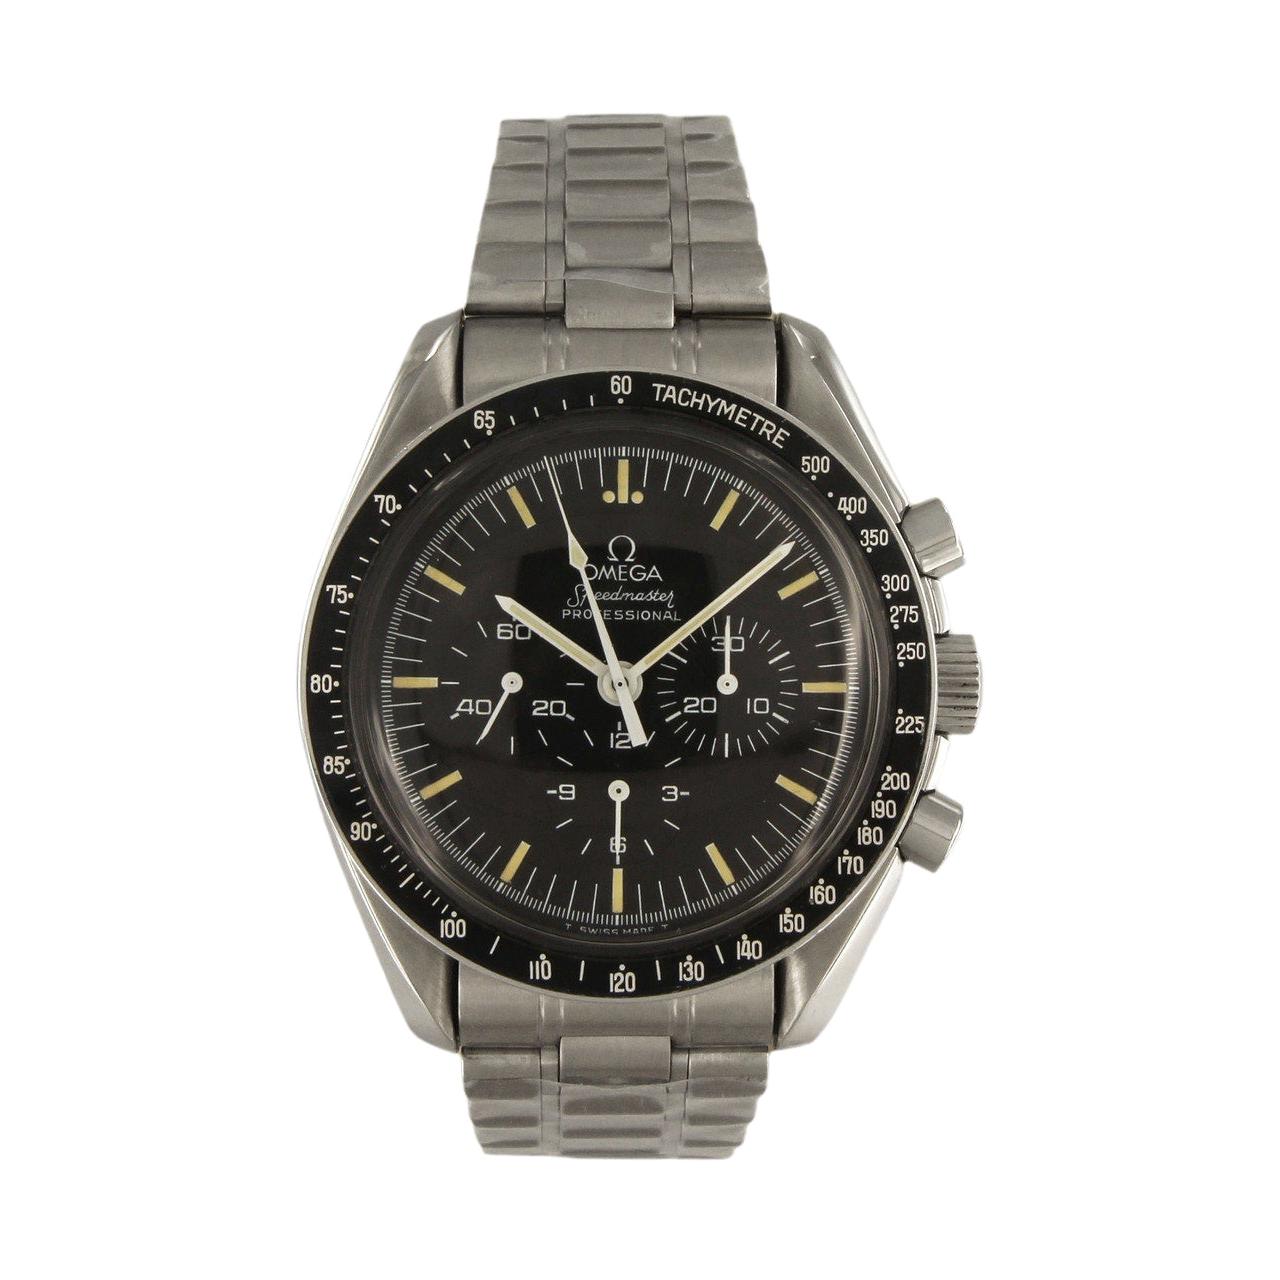 Omega Speedmaster Chronograph Vintage First Watch Worn on the Moon For Sale